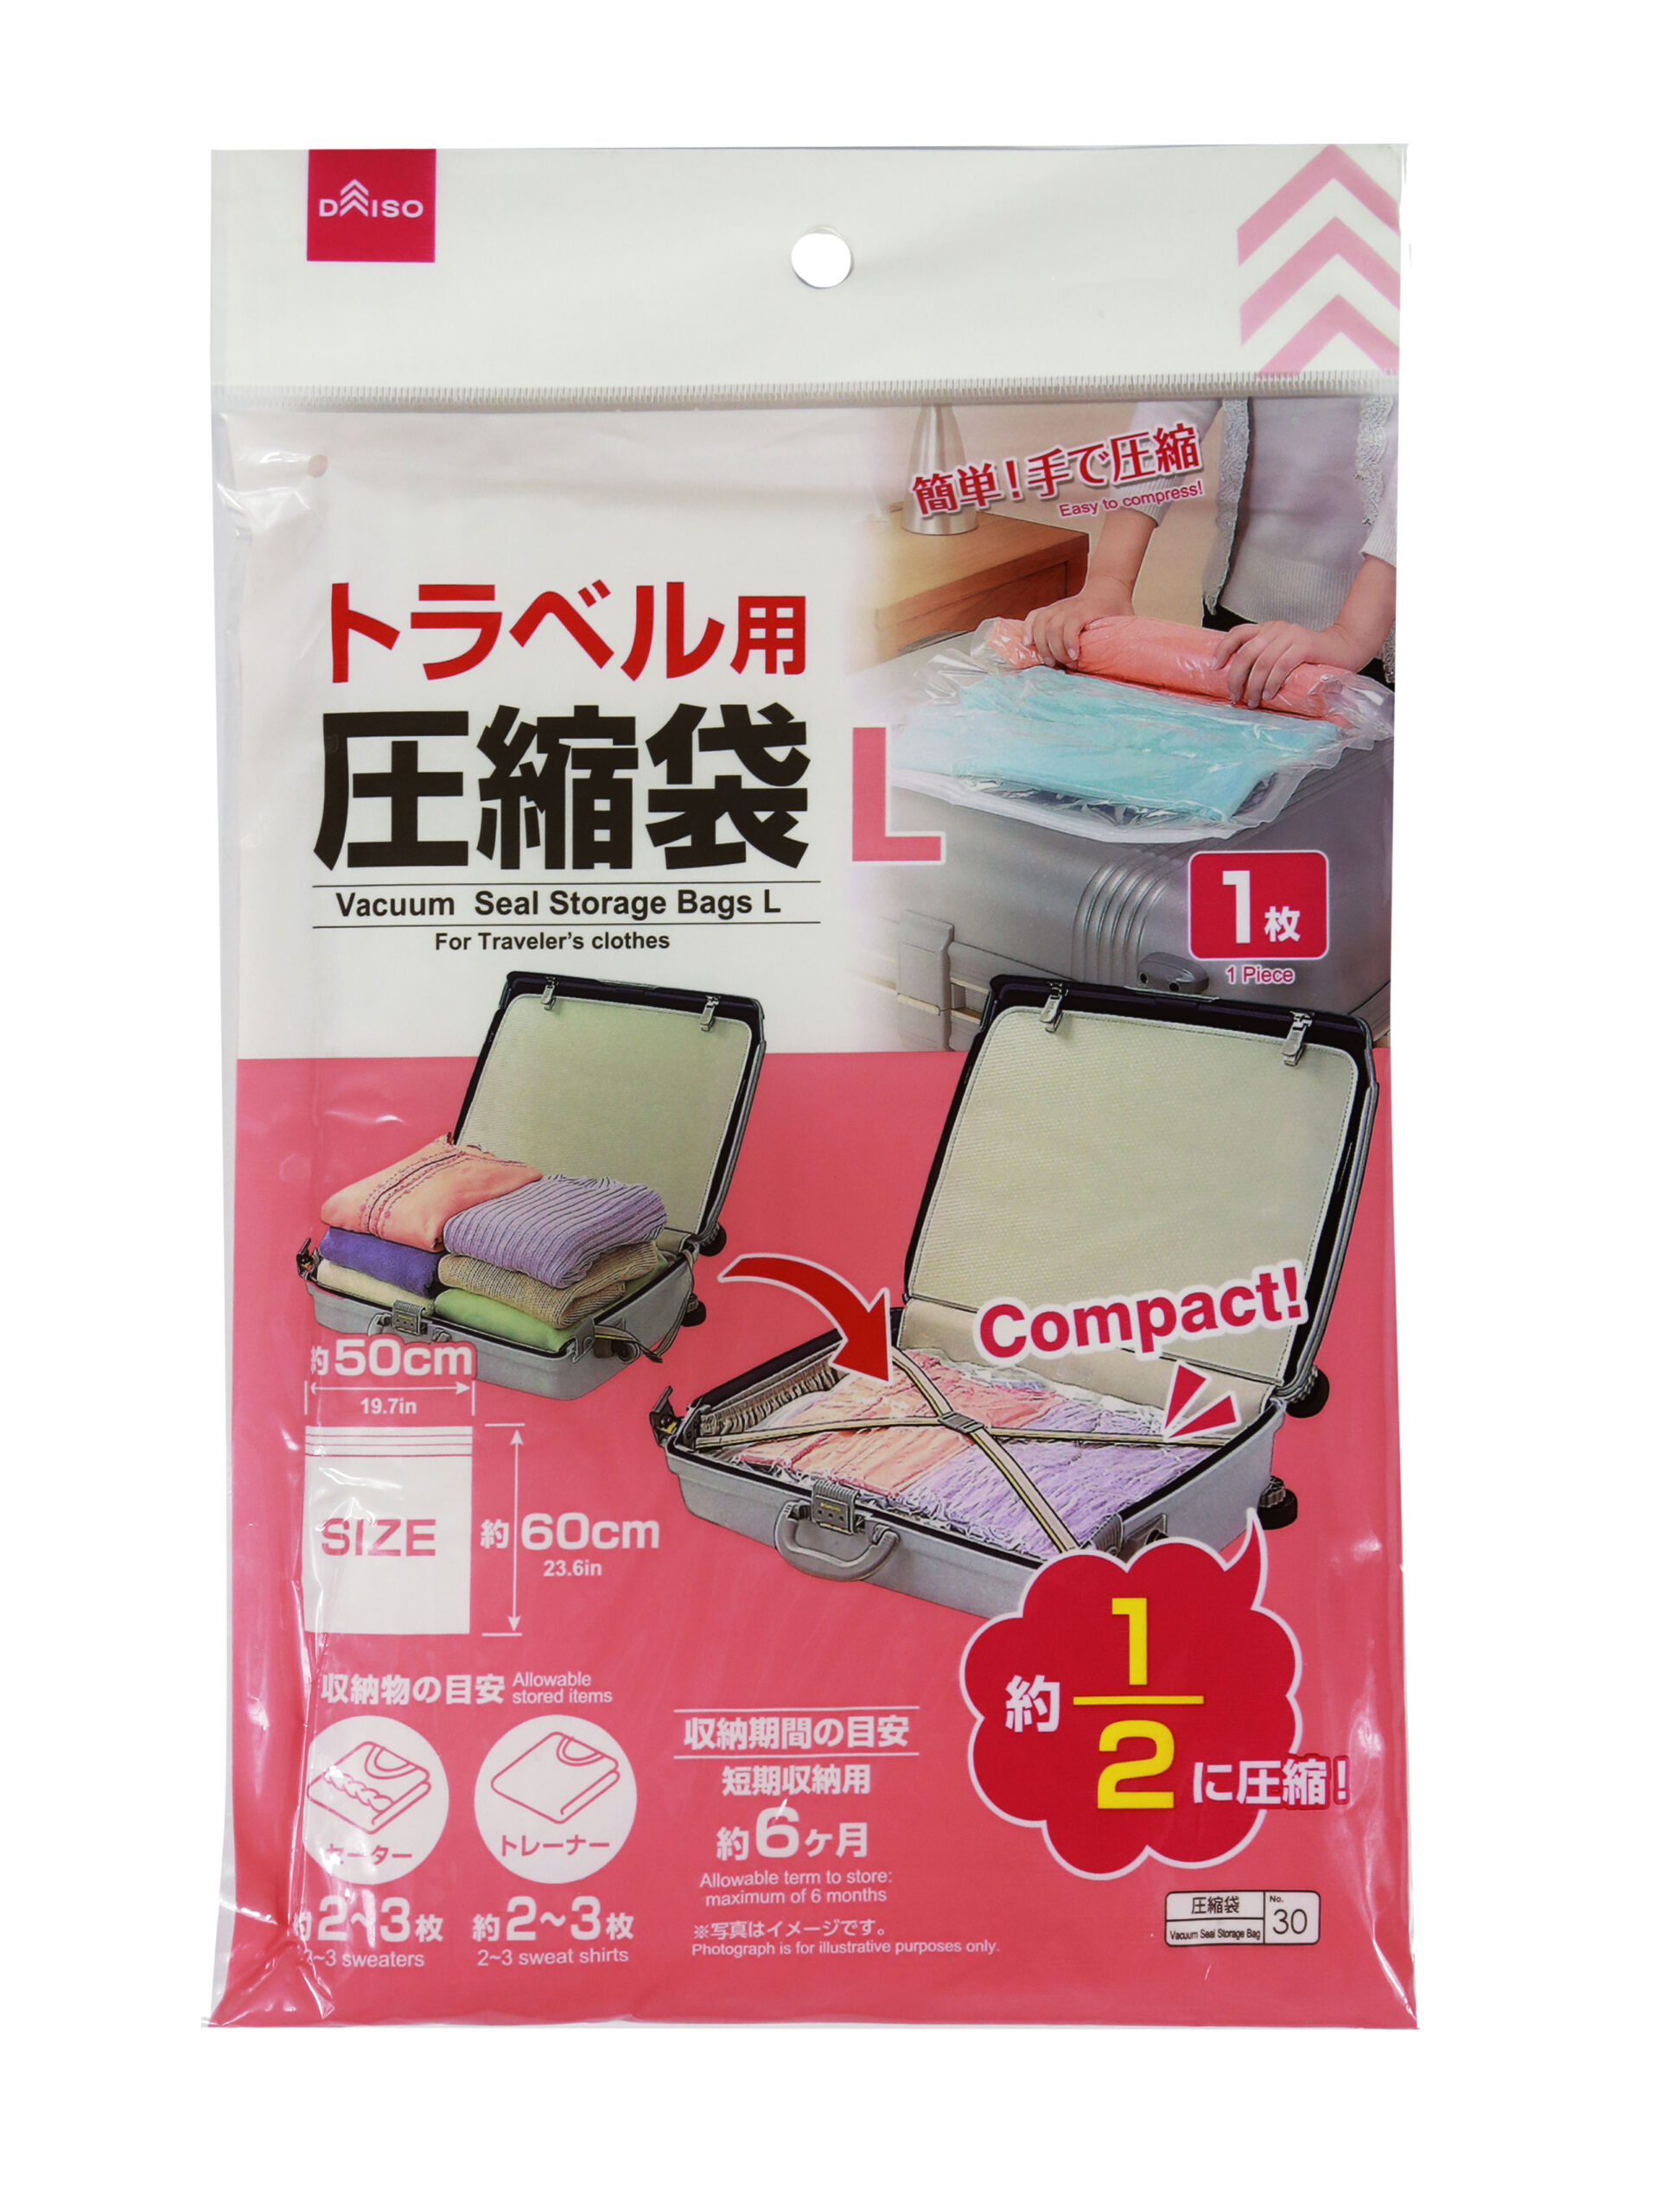 https://daisome.com/wp-content/uploads/2021/08/Travel_Vacuum-Seal-Storage-Bags-L-scaled.jpg